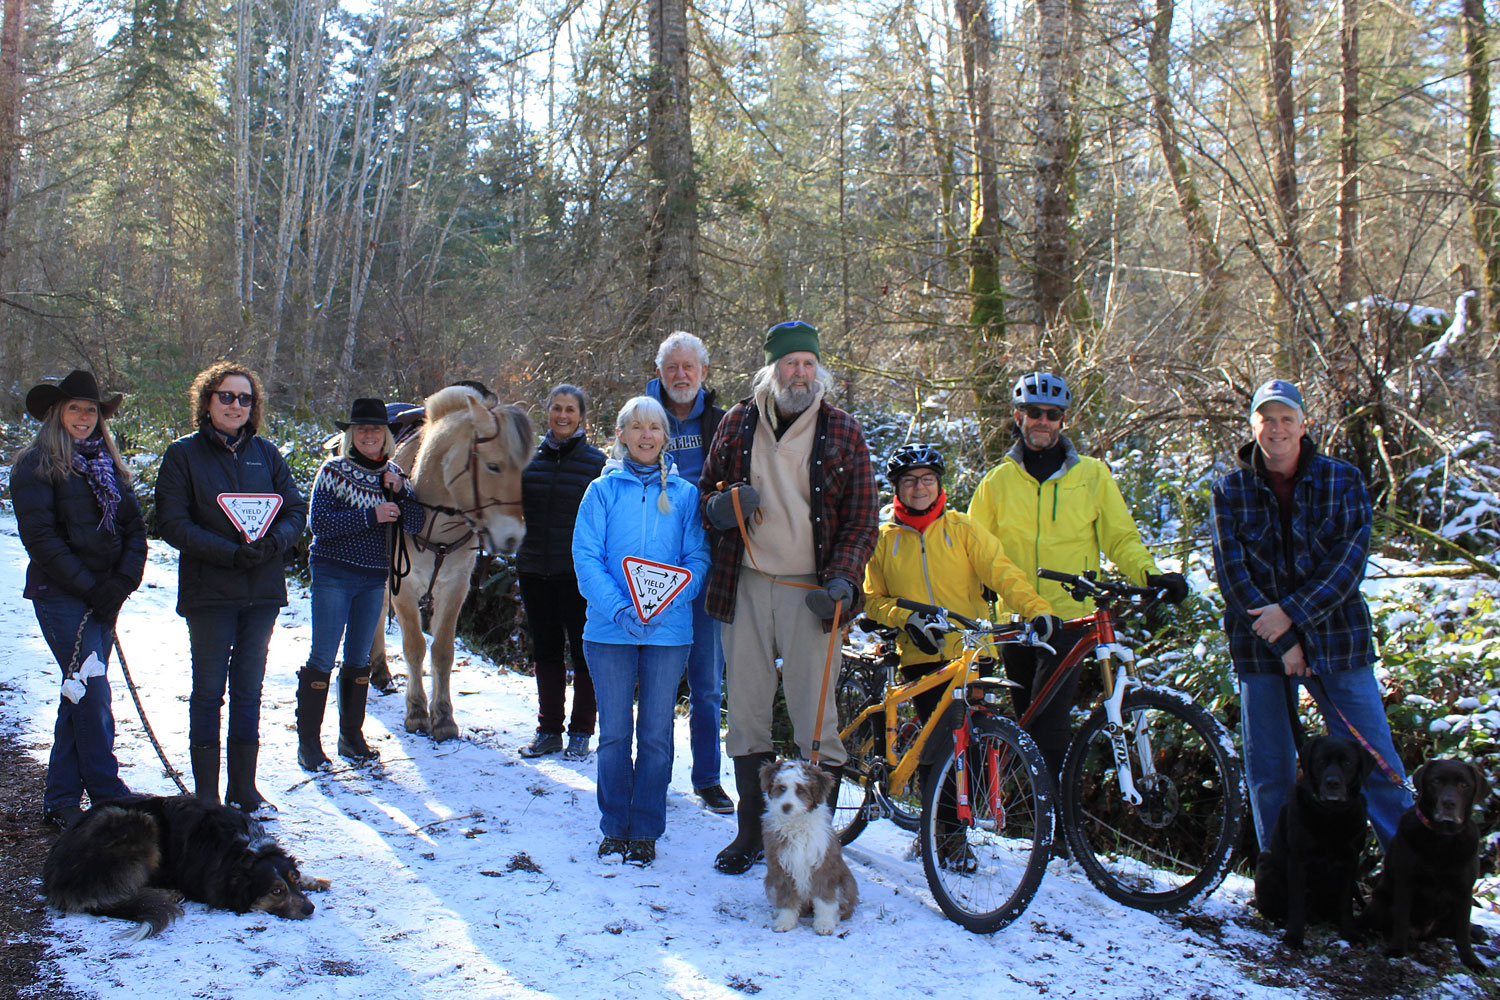 Group of people with share the trails "yield" signs. Group includes hikers, cyclists, a horse, and dogwalkers.